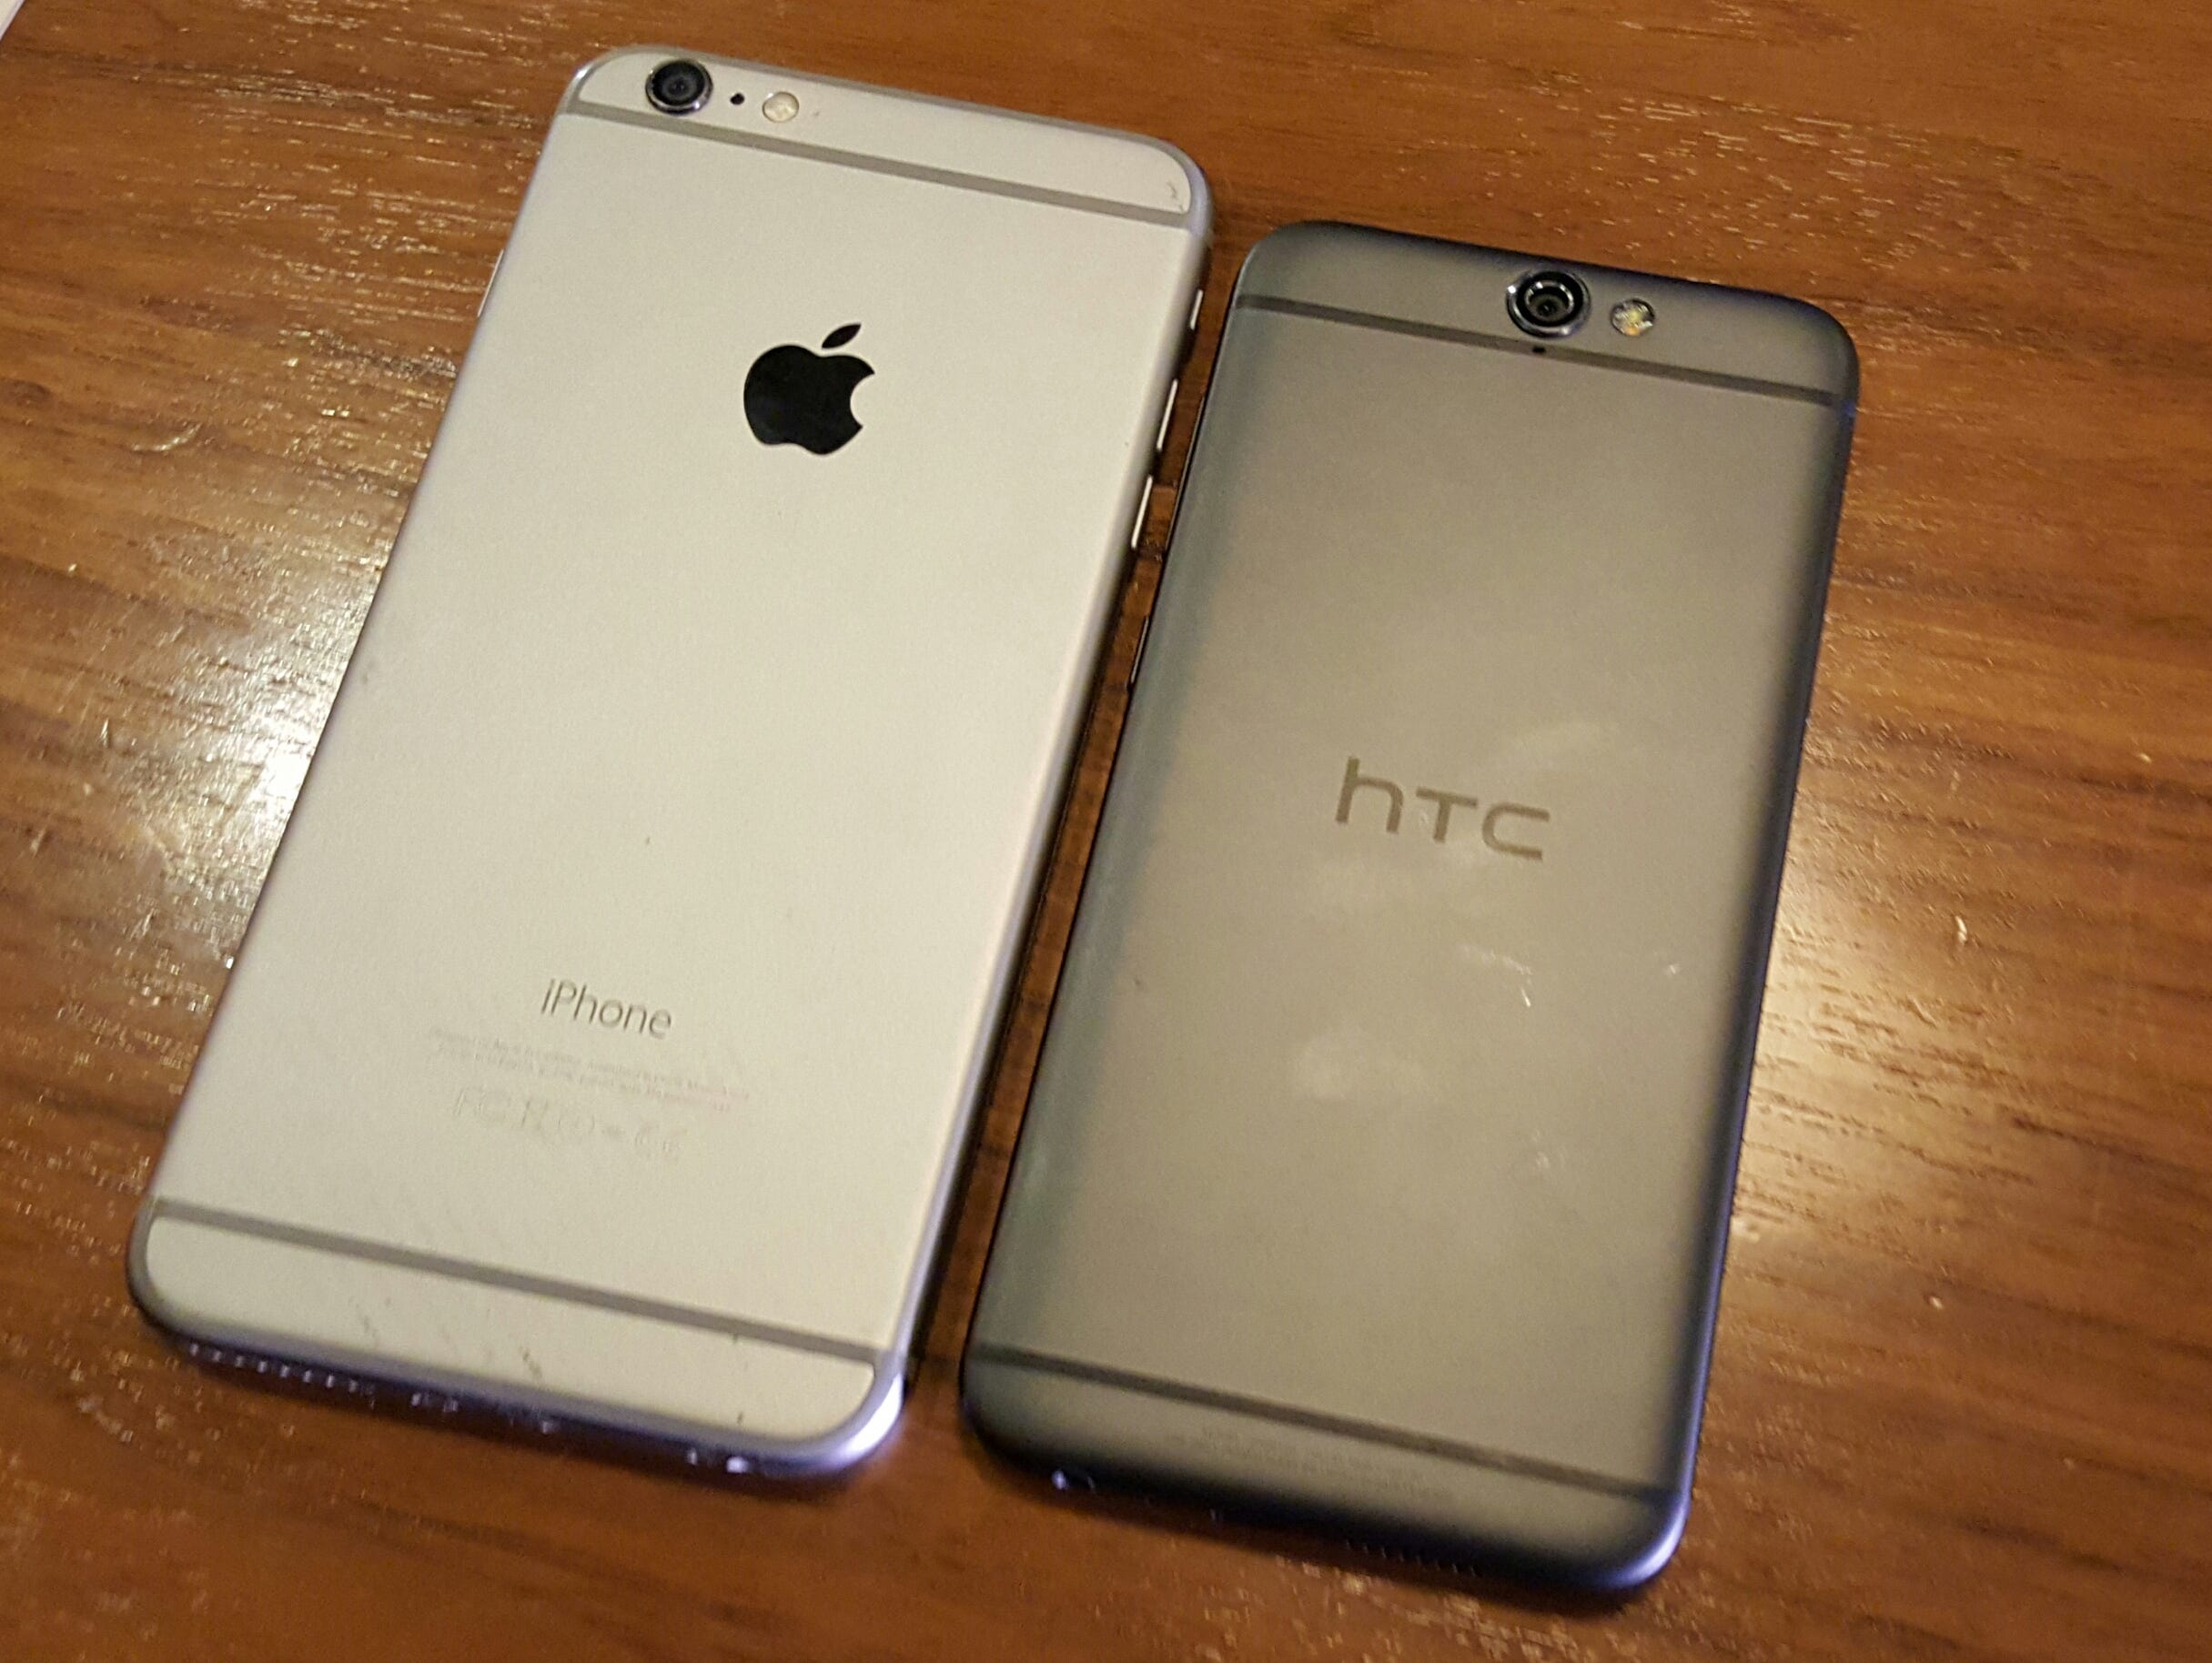 HTC's new One A9 smartphone (right) shares a design similar to Apple's iPhone 6 and 6 Plus line (left)